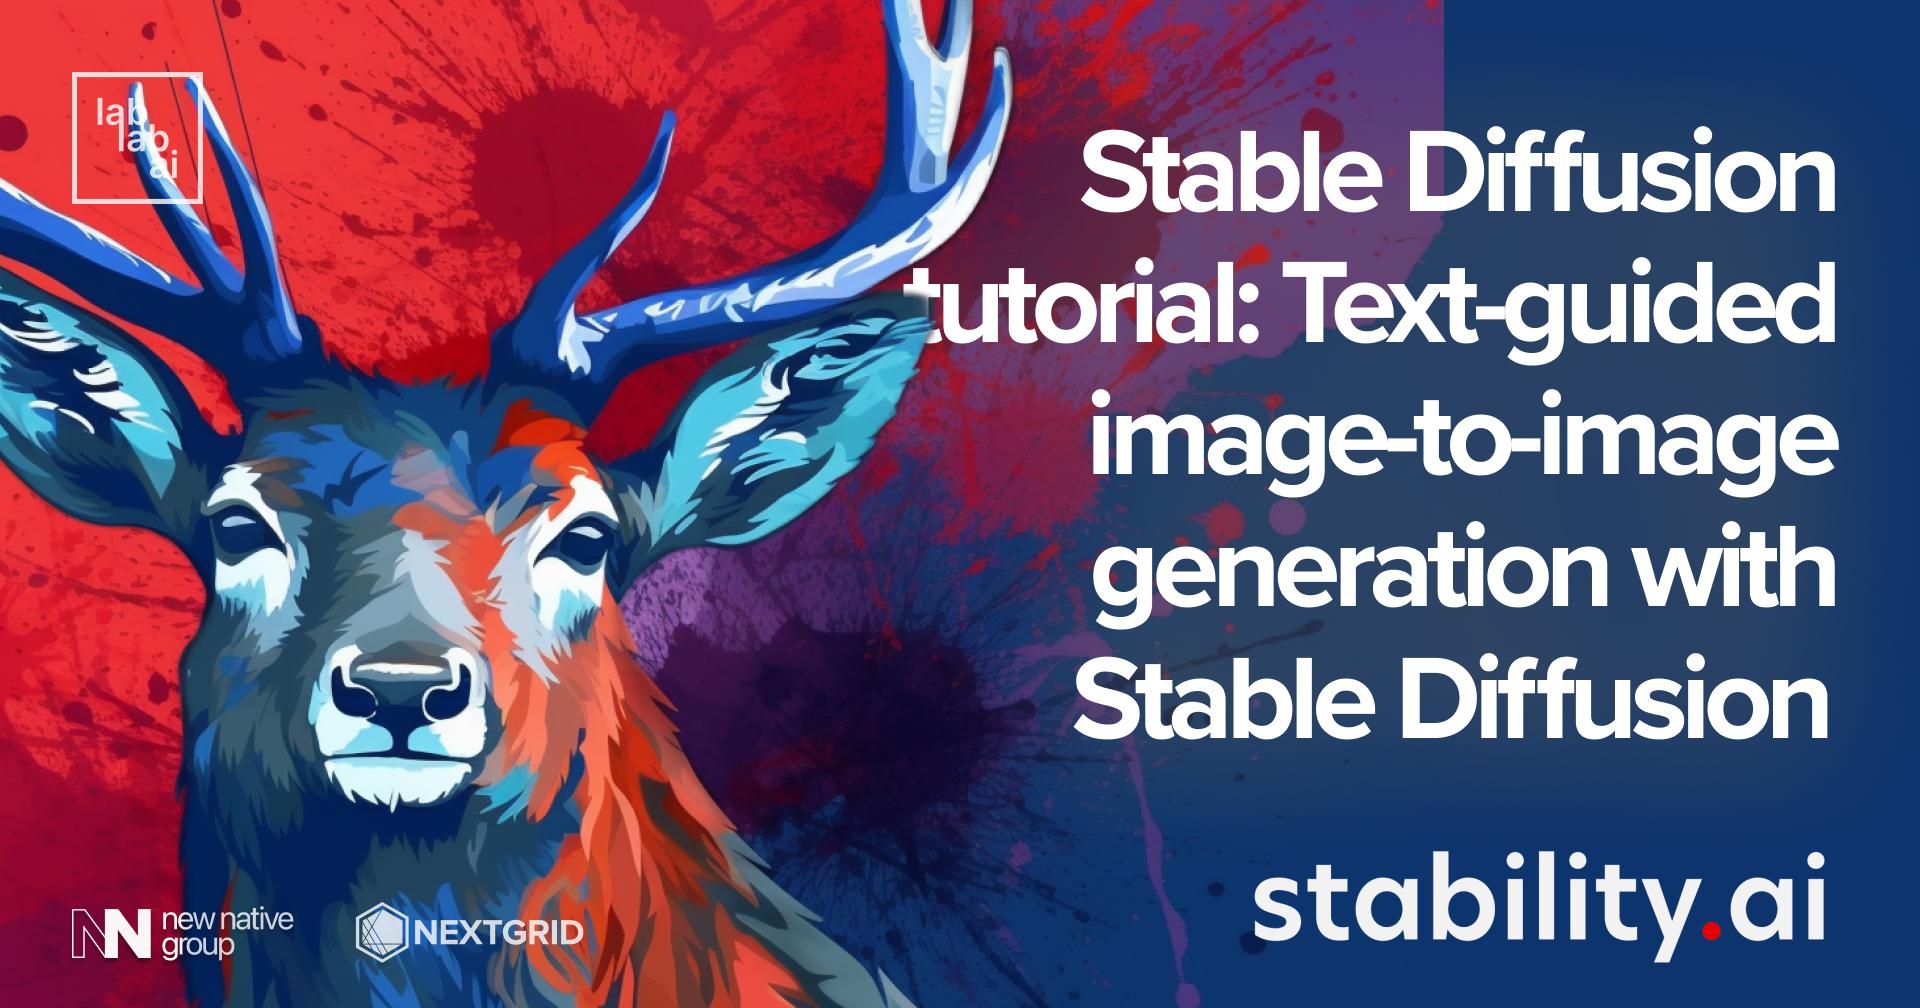 Stable Diffusion tutorial: Text-guided image-to-image generation with Stable Diffusion